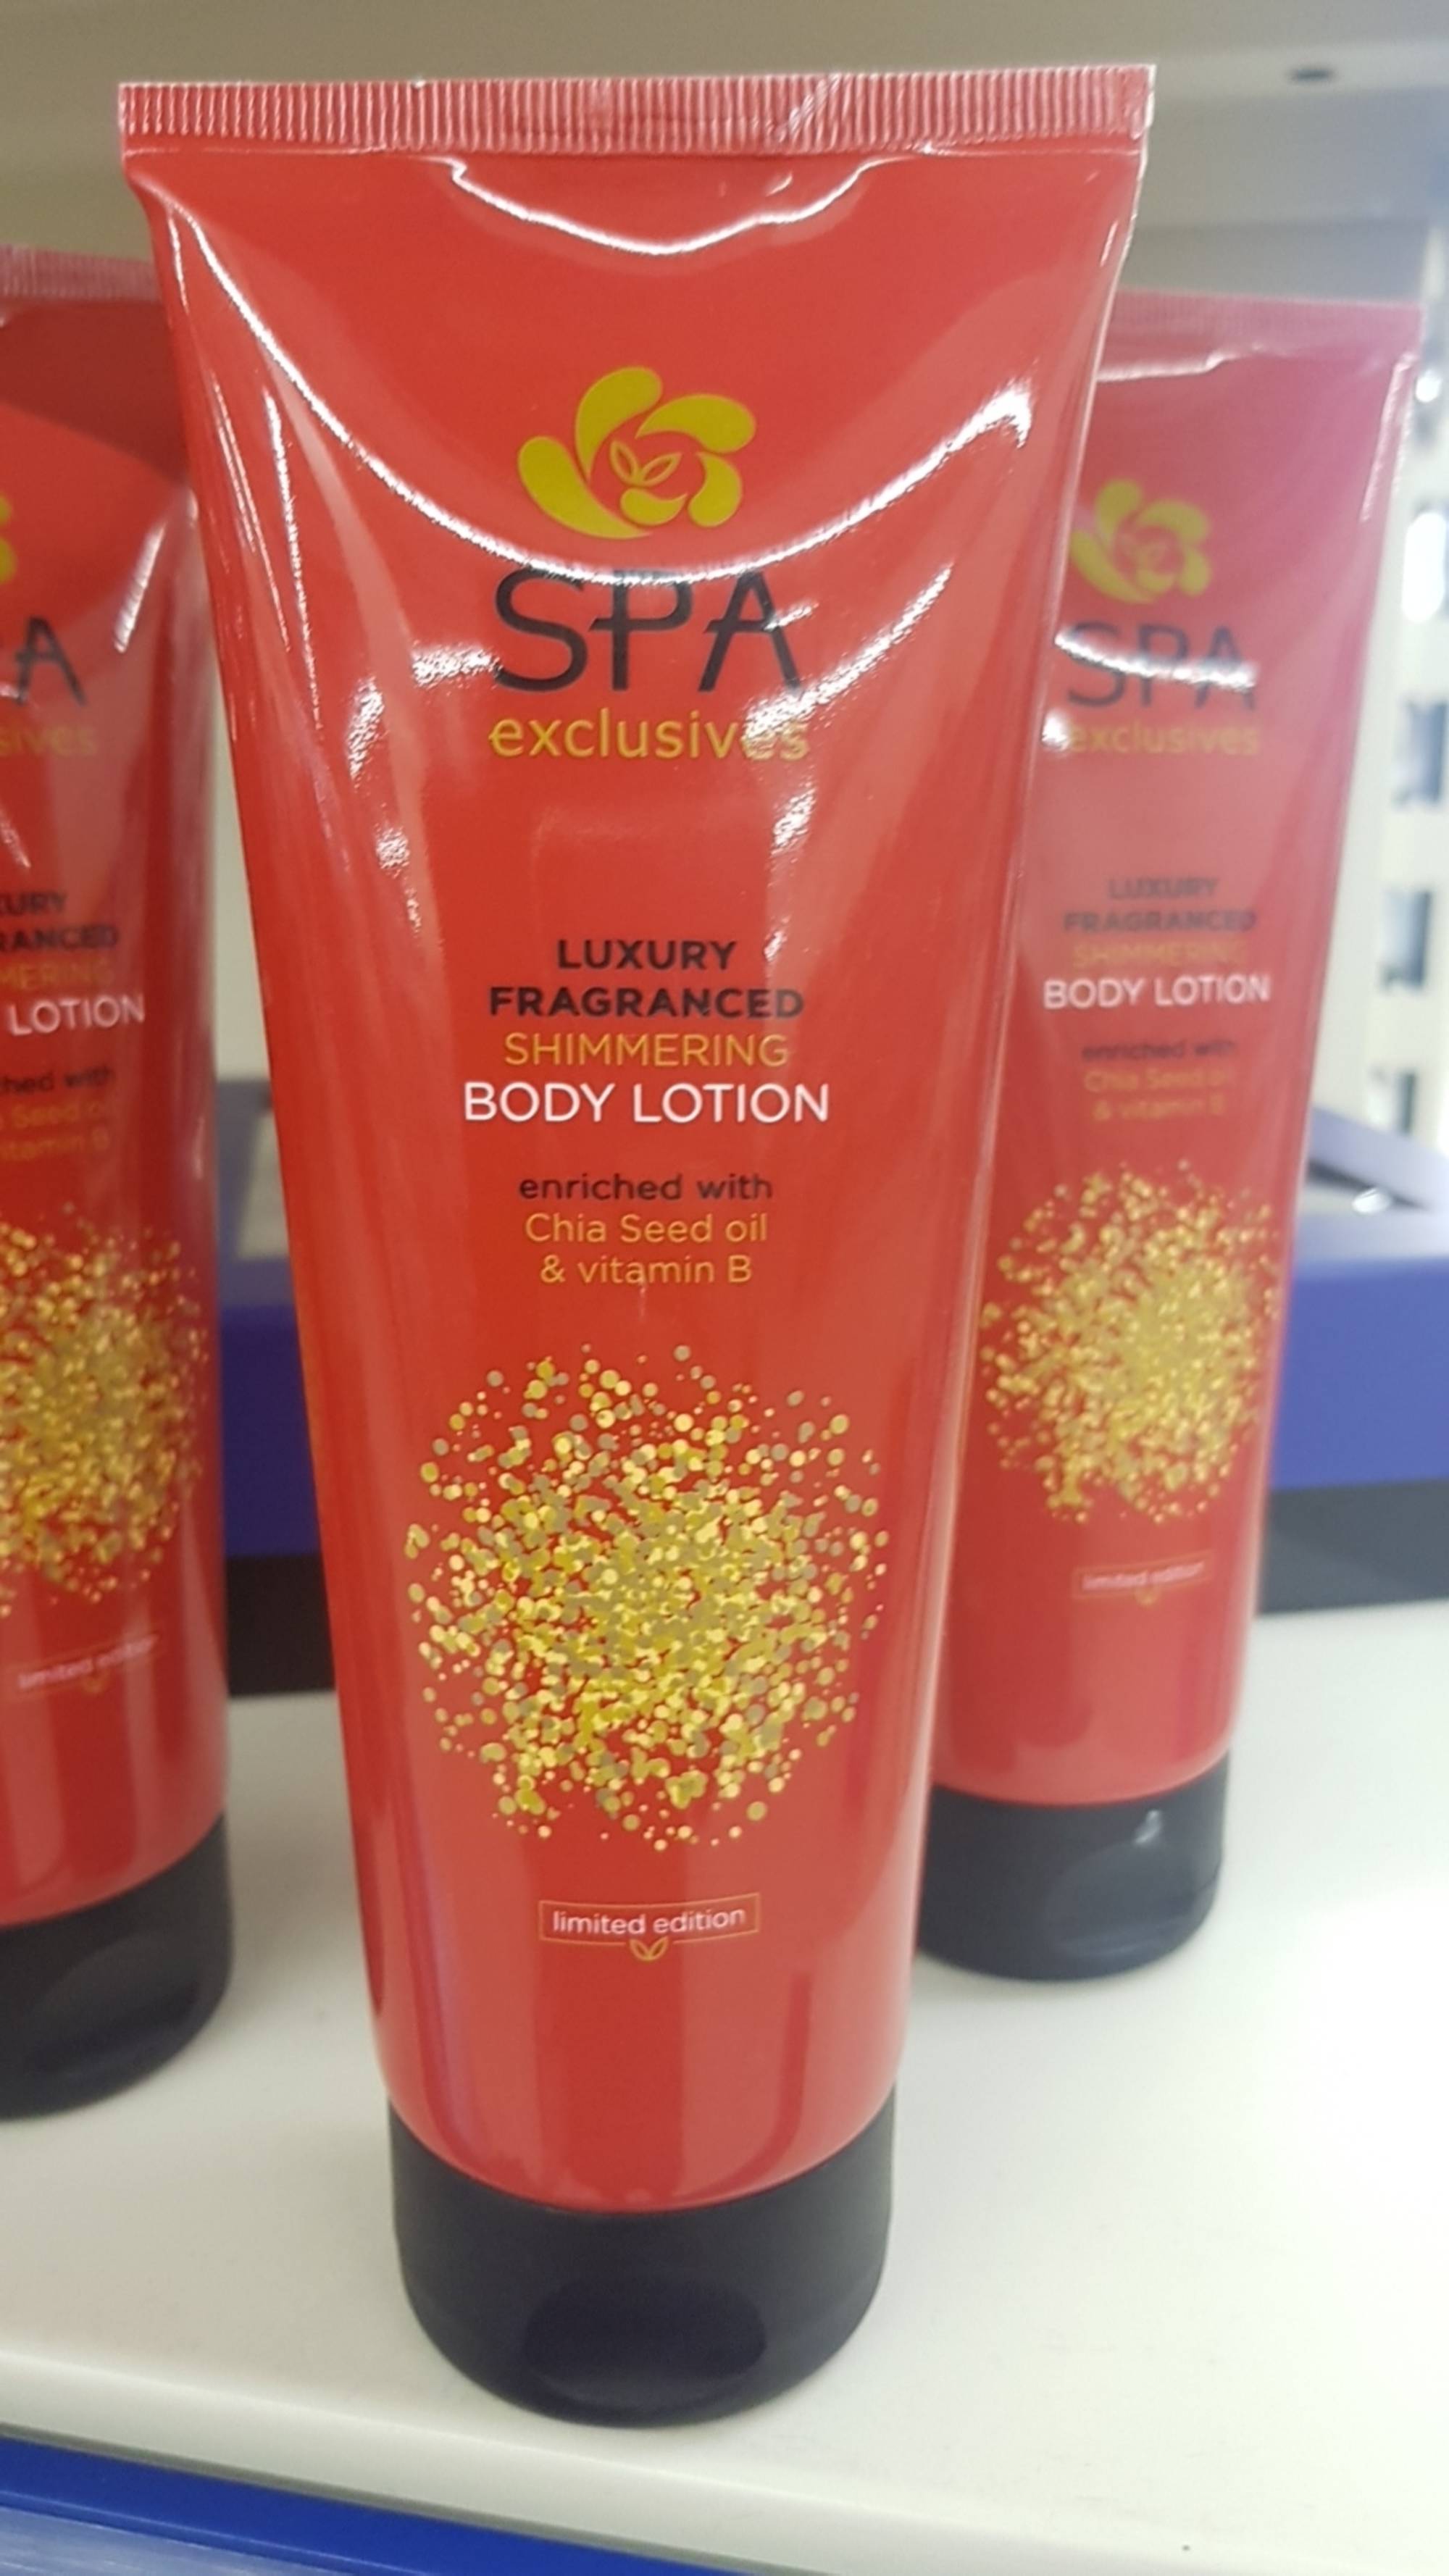 SPA EXCLUSIVES - Luxury fragrance shimmering - Body lotion